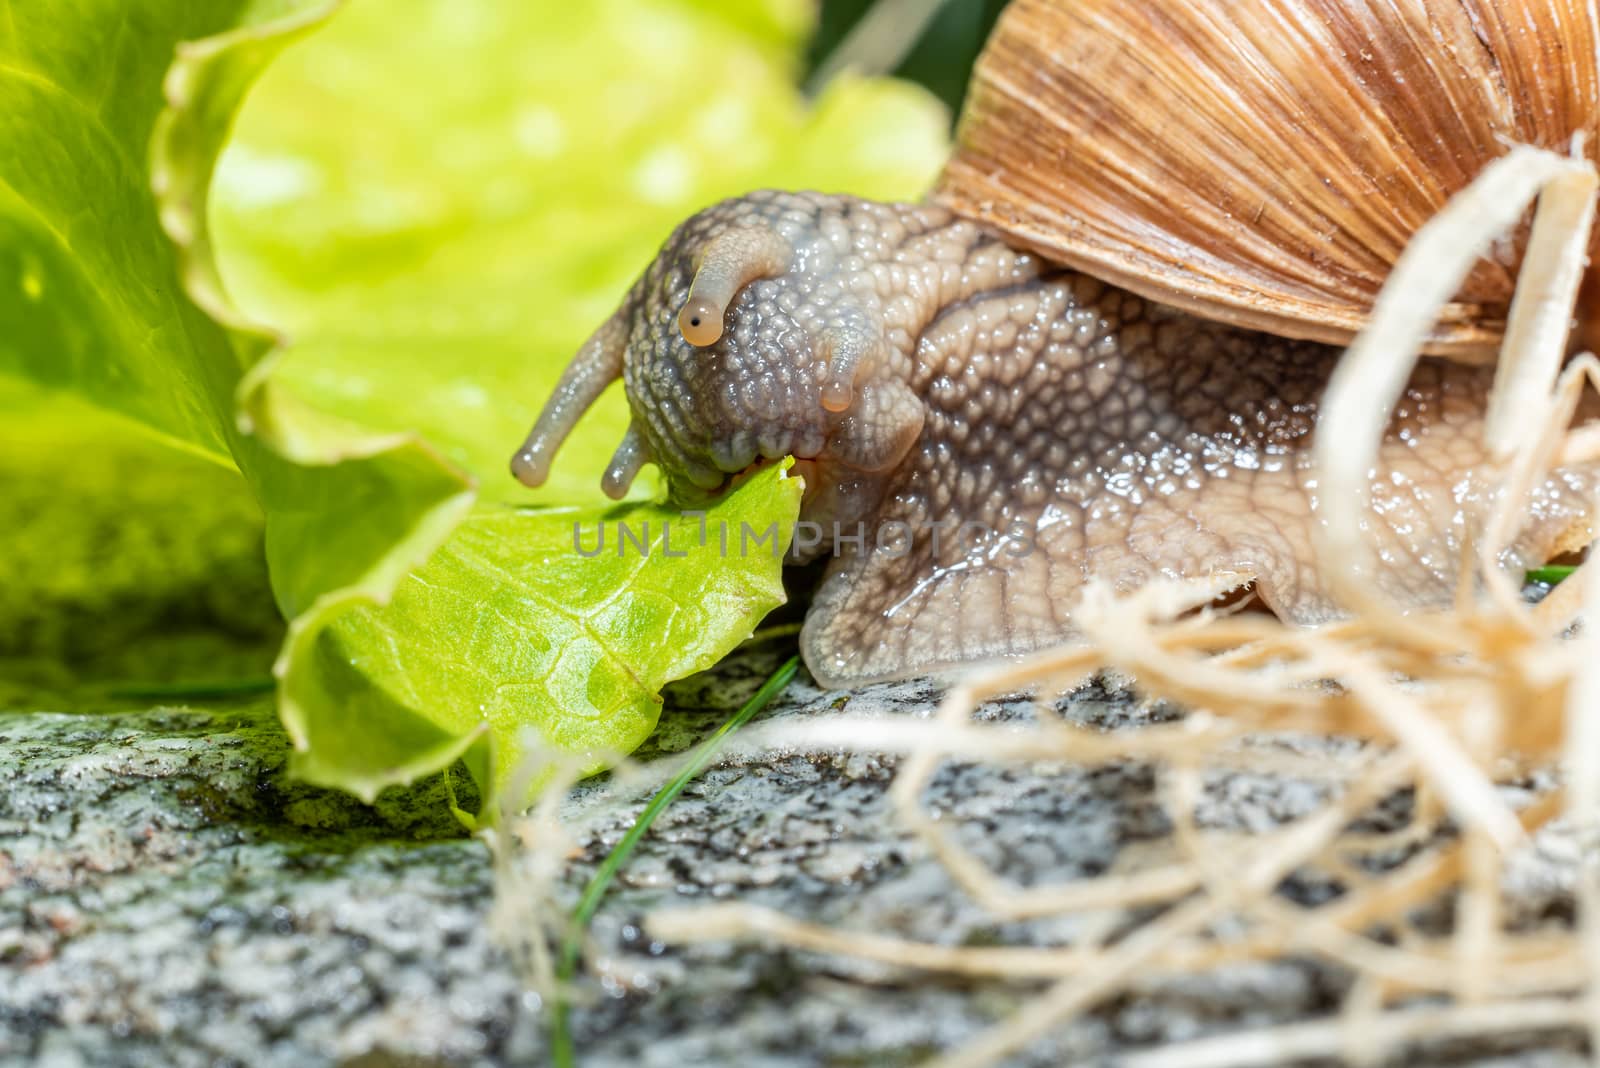 Macro close-up of a Burgundy snail eating a lettuce leaf with the antennae retracted leaf pulling it with the mouthparts leaf - jaw visible by Umtsga